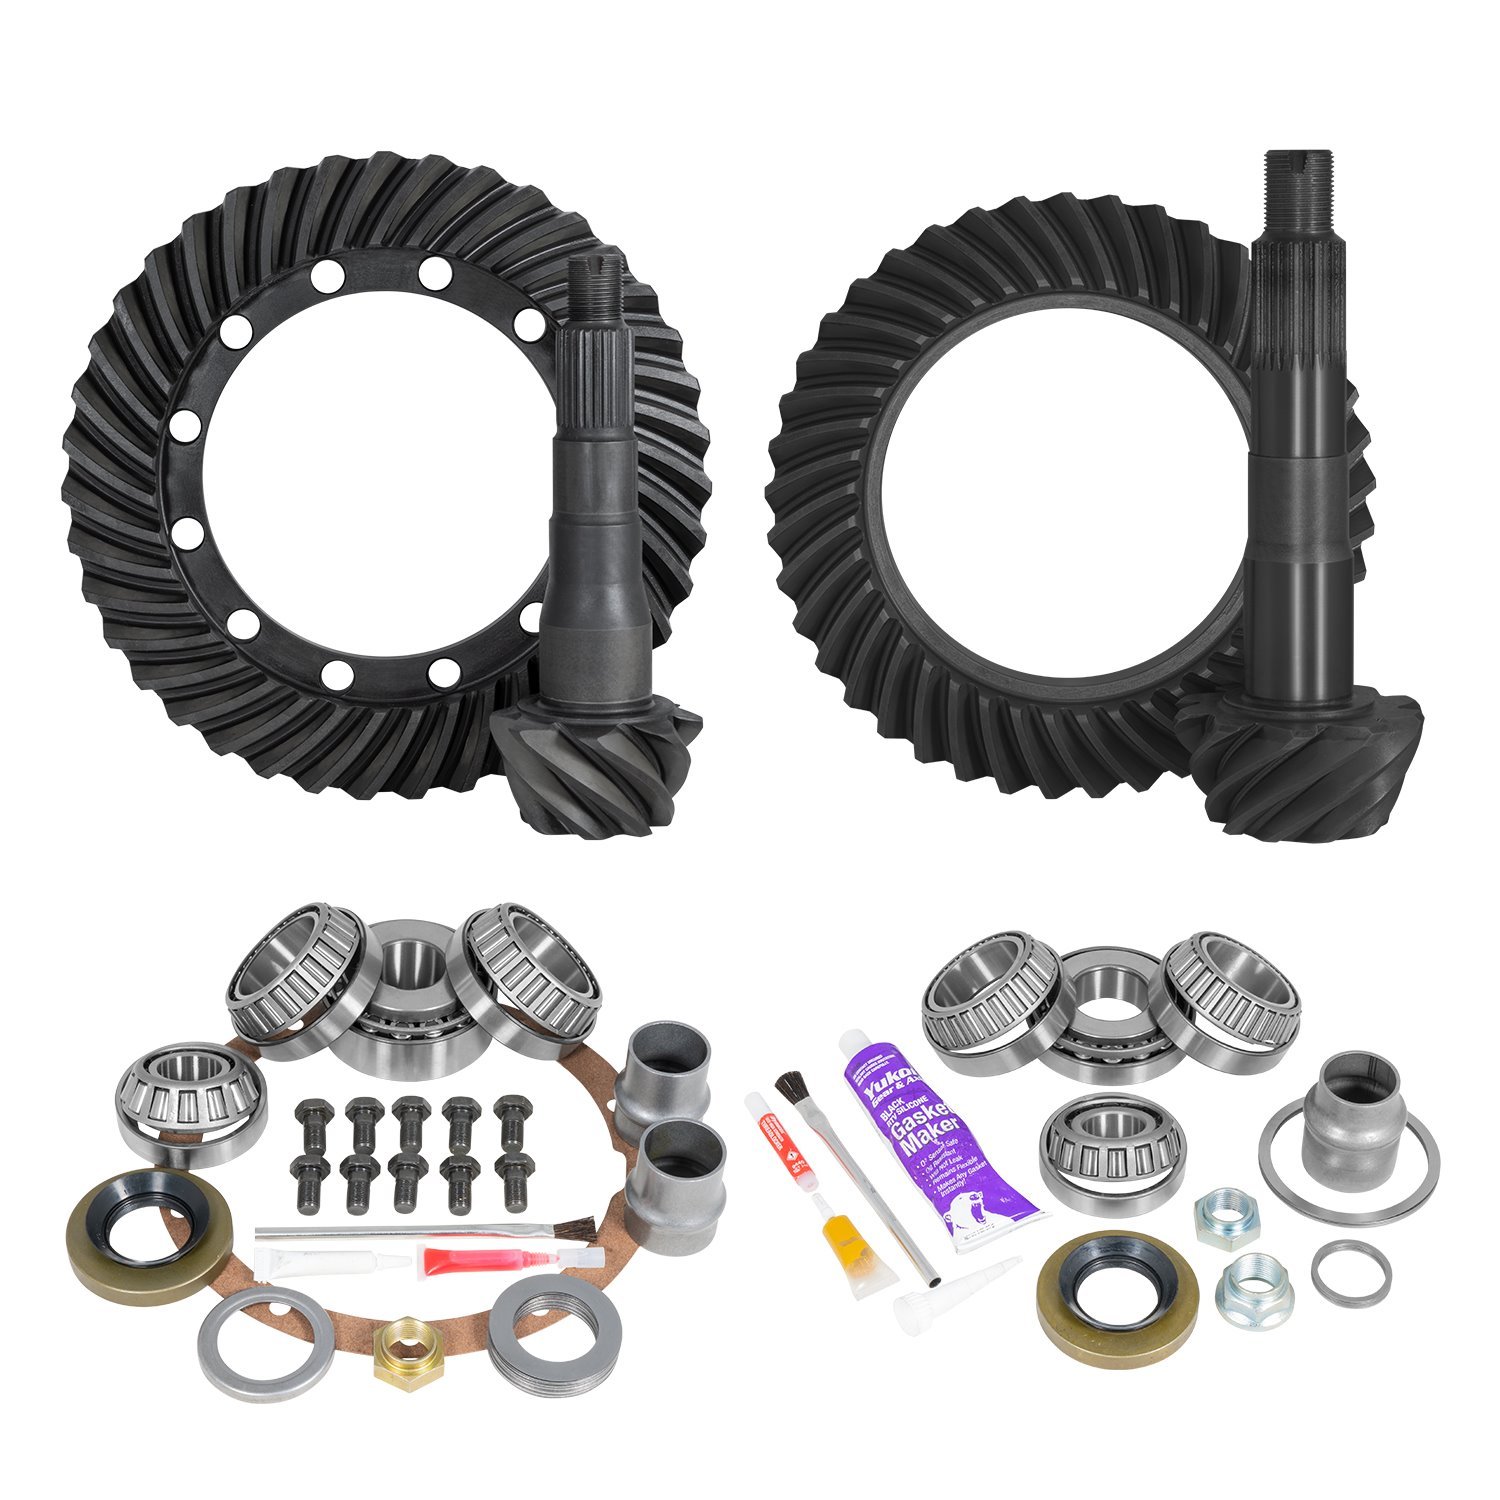 Ring & Pinion Gear Kit Package Front & Rear With Install Kits - Toyota 9.5/8R